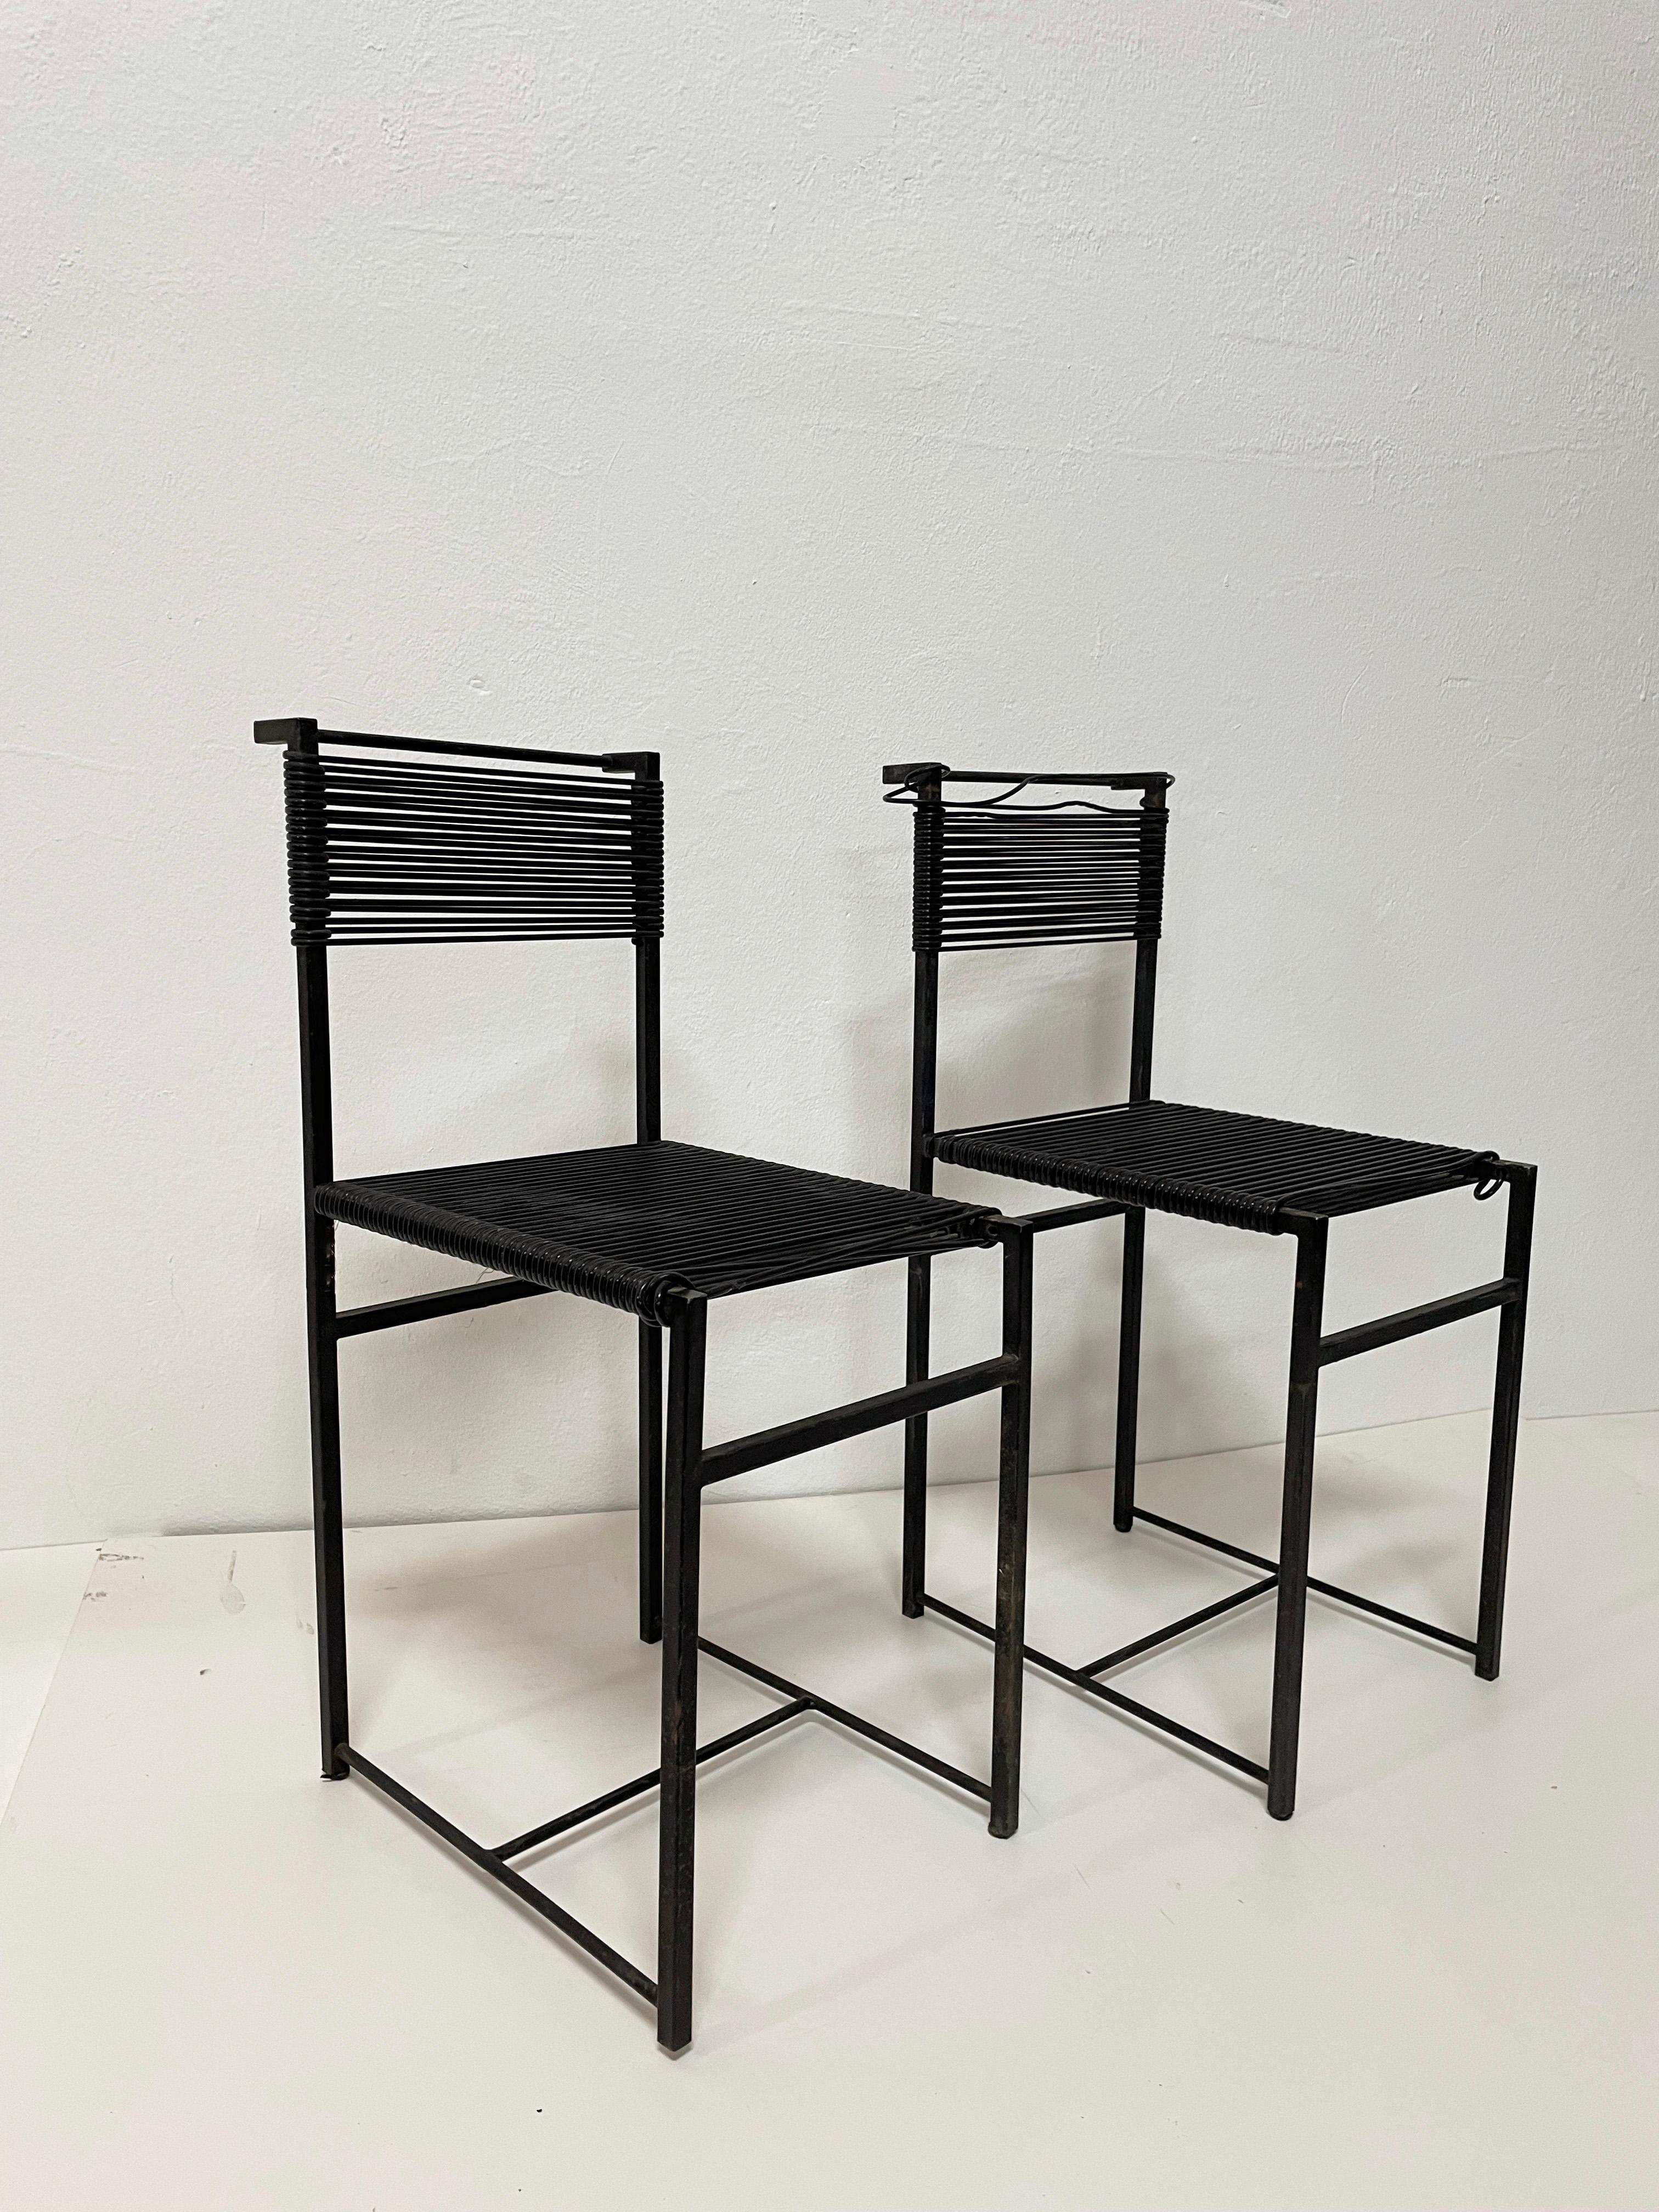 Set of 2 vintage handcrafted chairs designed in the style of Spaghetti chairs by Giandomenico Belotti

The chairs feature a minimalist black-painted steel frame and black PVC strips forming the seat and backrest.

The frame is made of rectangular